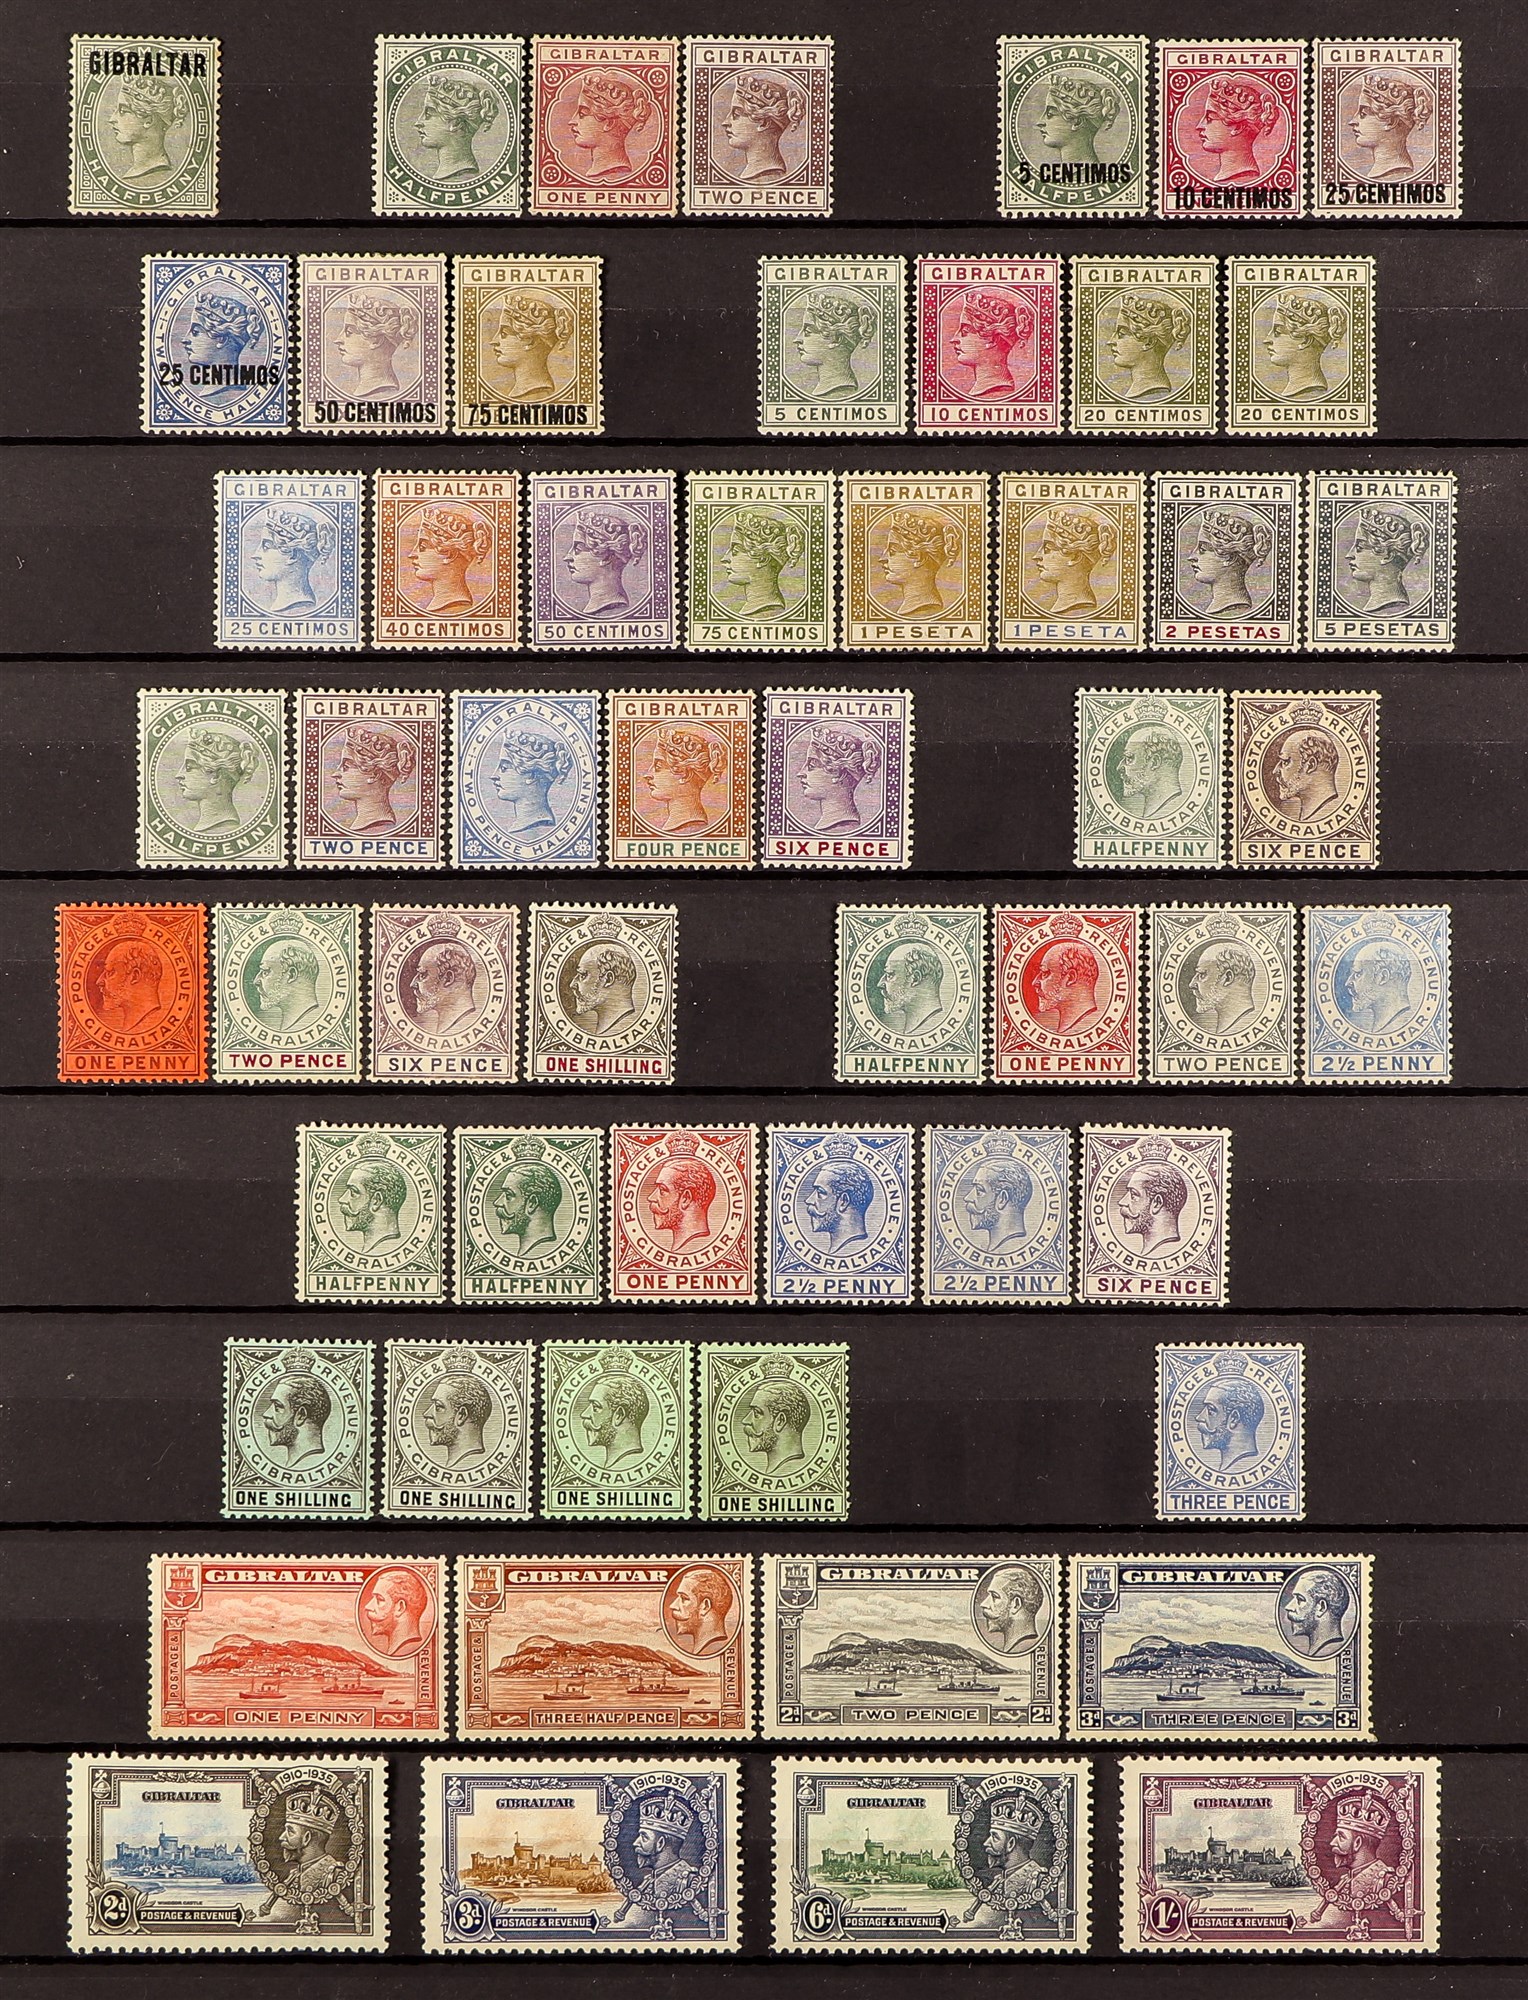 GIBRALTAR 1886 - 1948 MINT COLLECTION of 70 stamps on protective pages, note 1889 range to 75c on